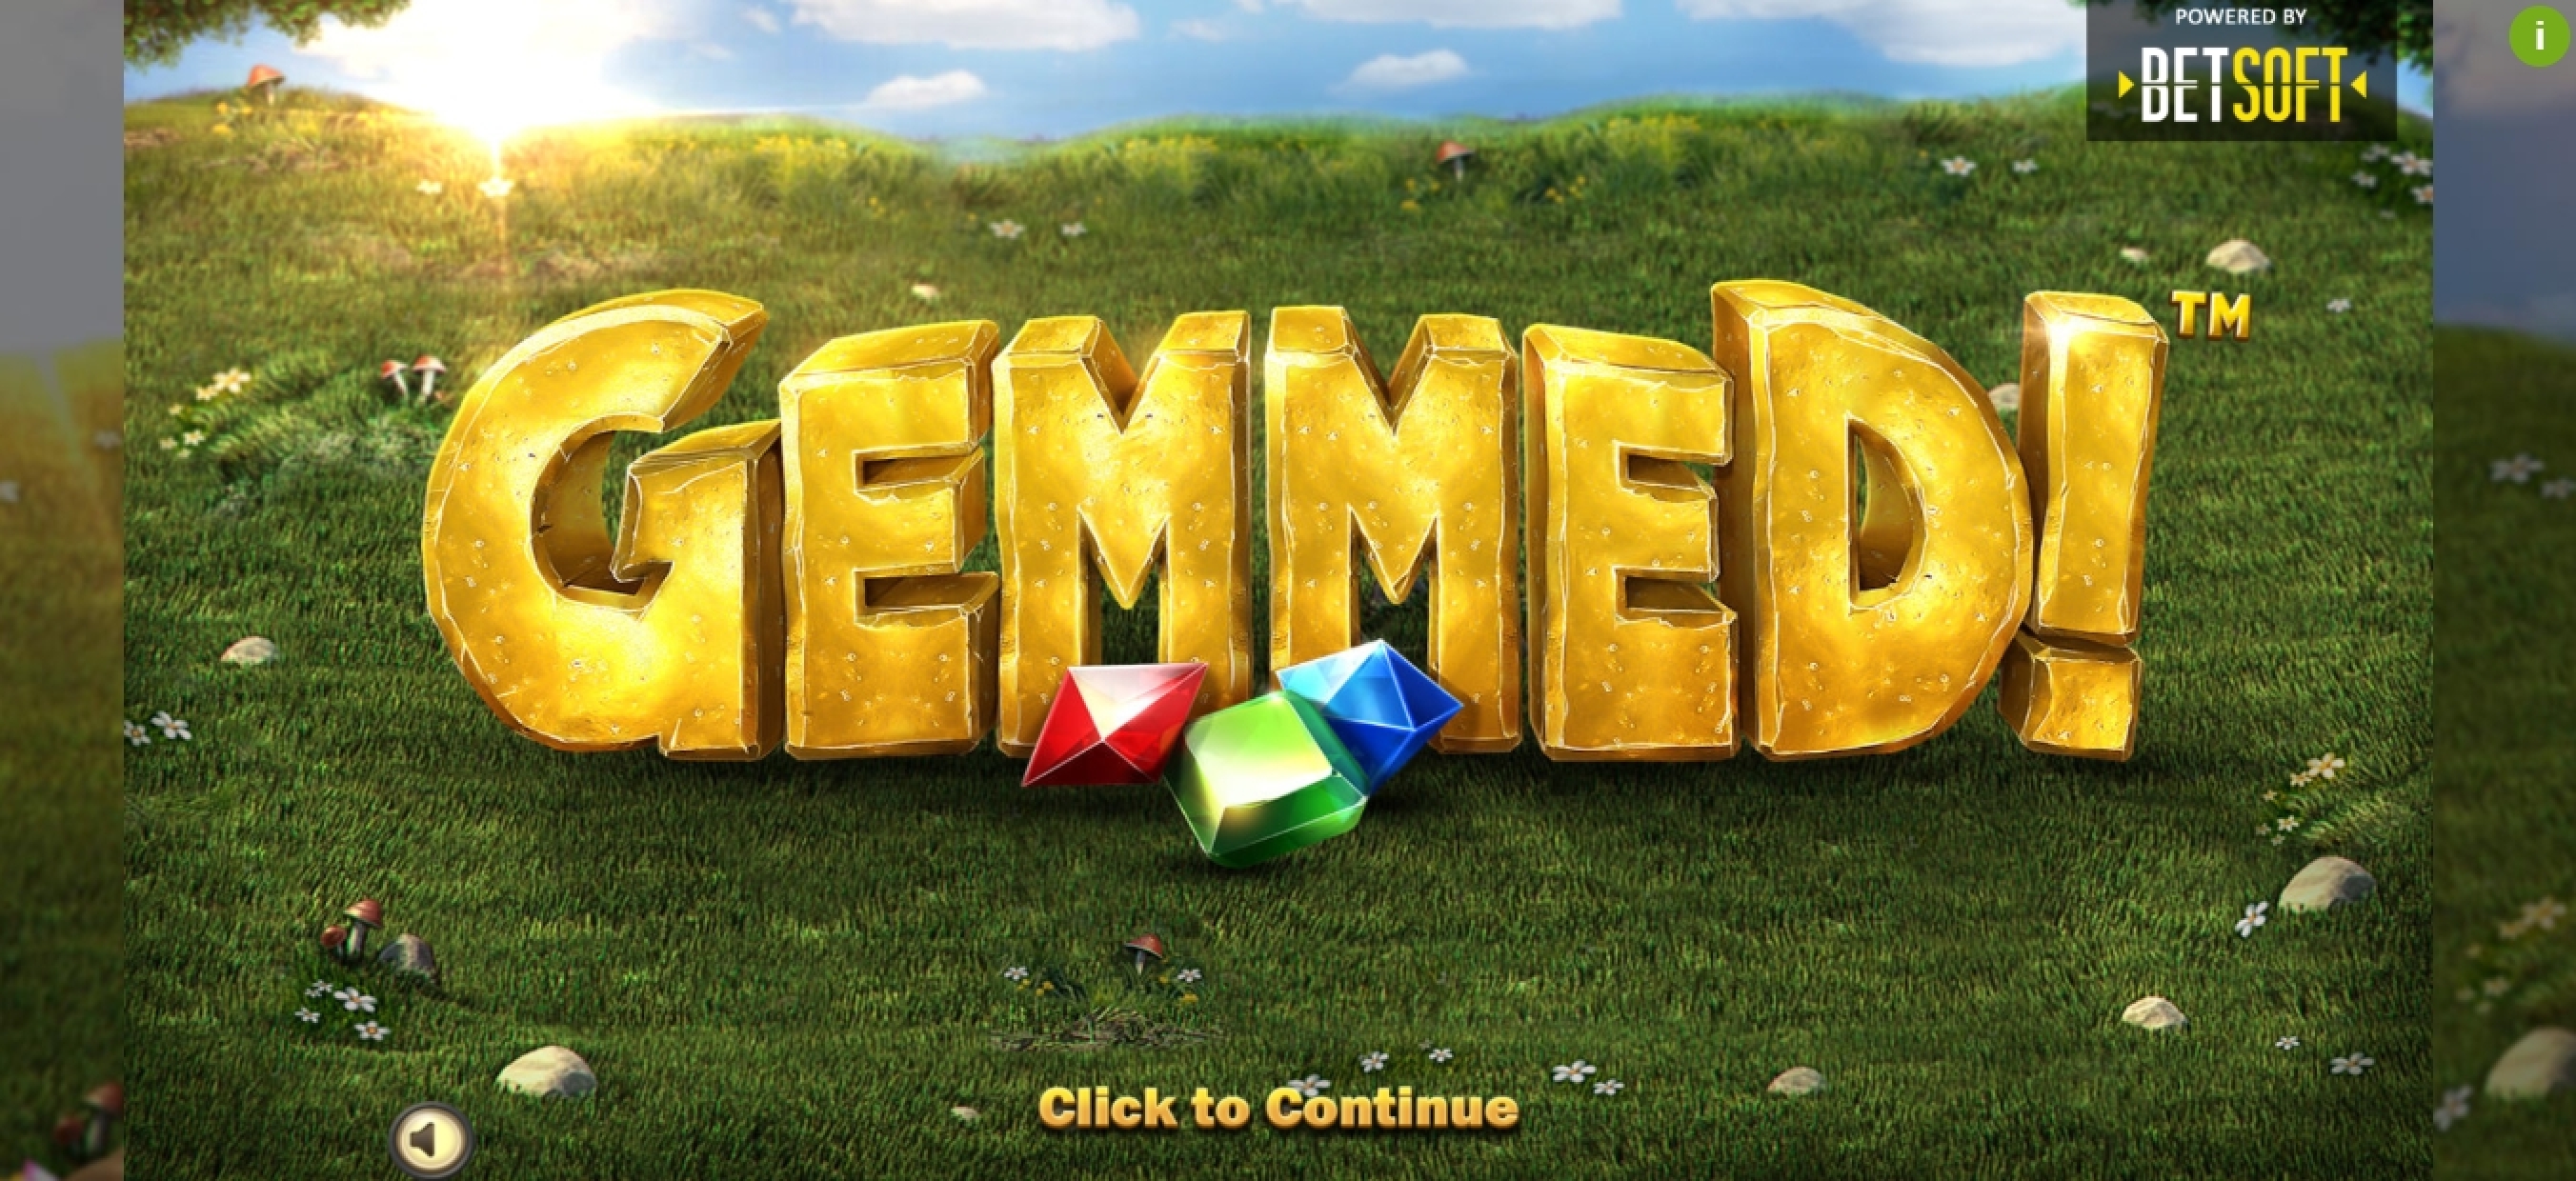 Play Gemmed! Free Casino Slot Game by Betsoft